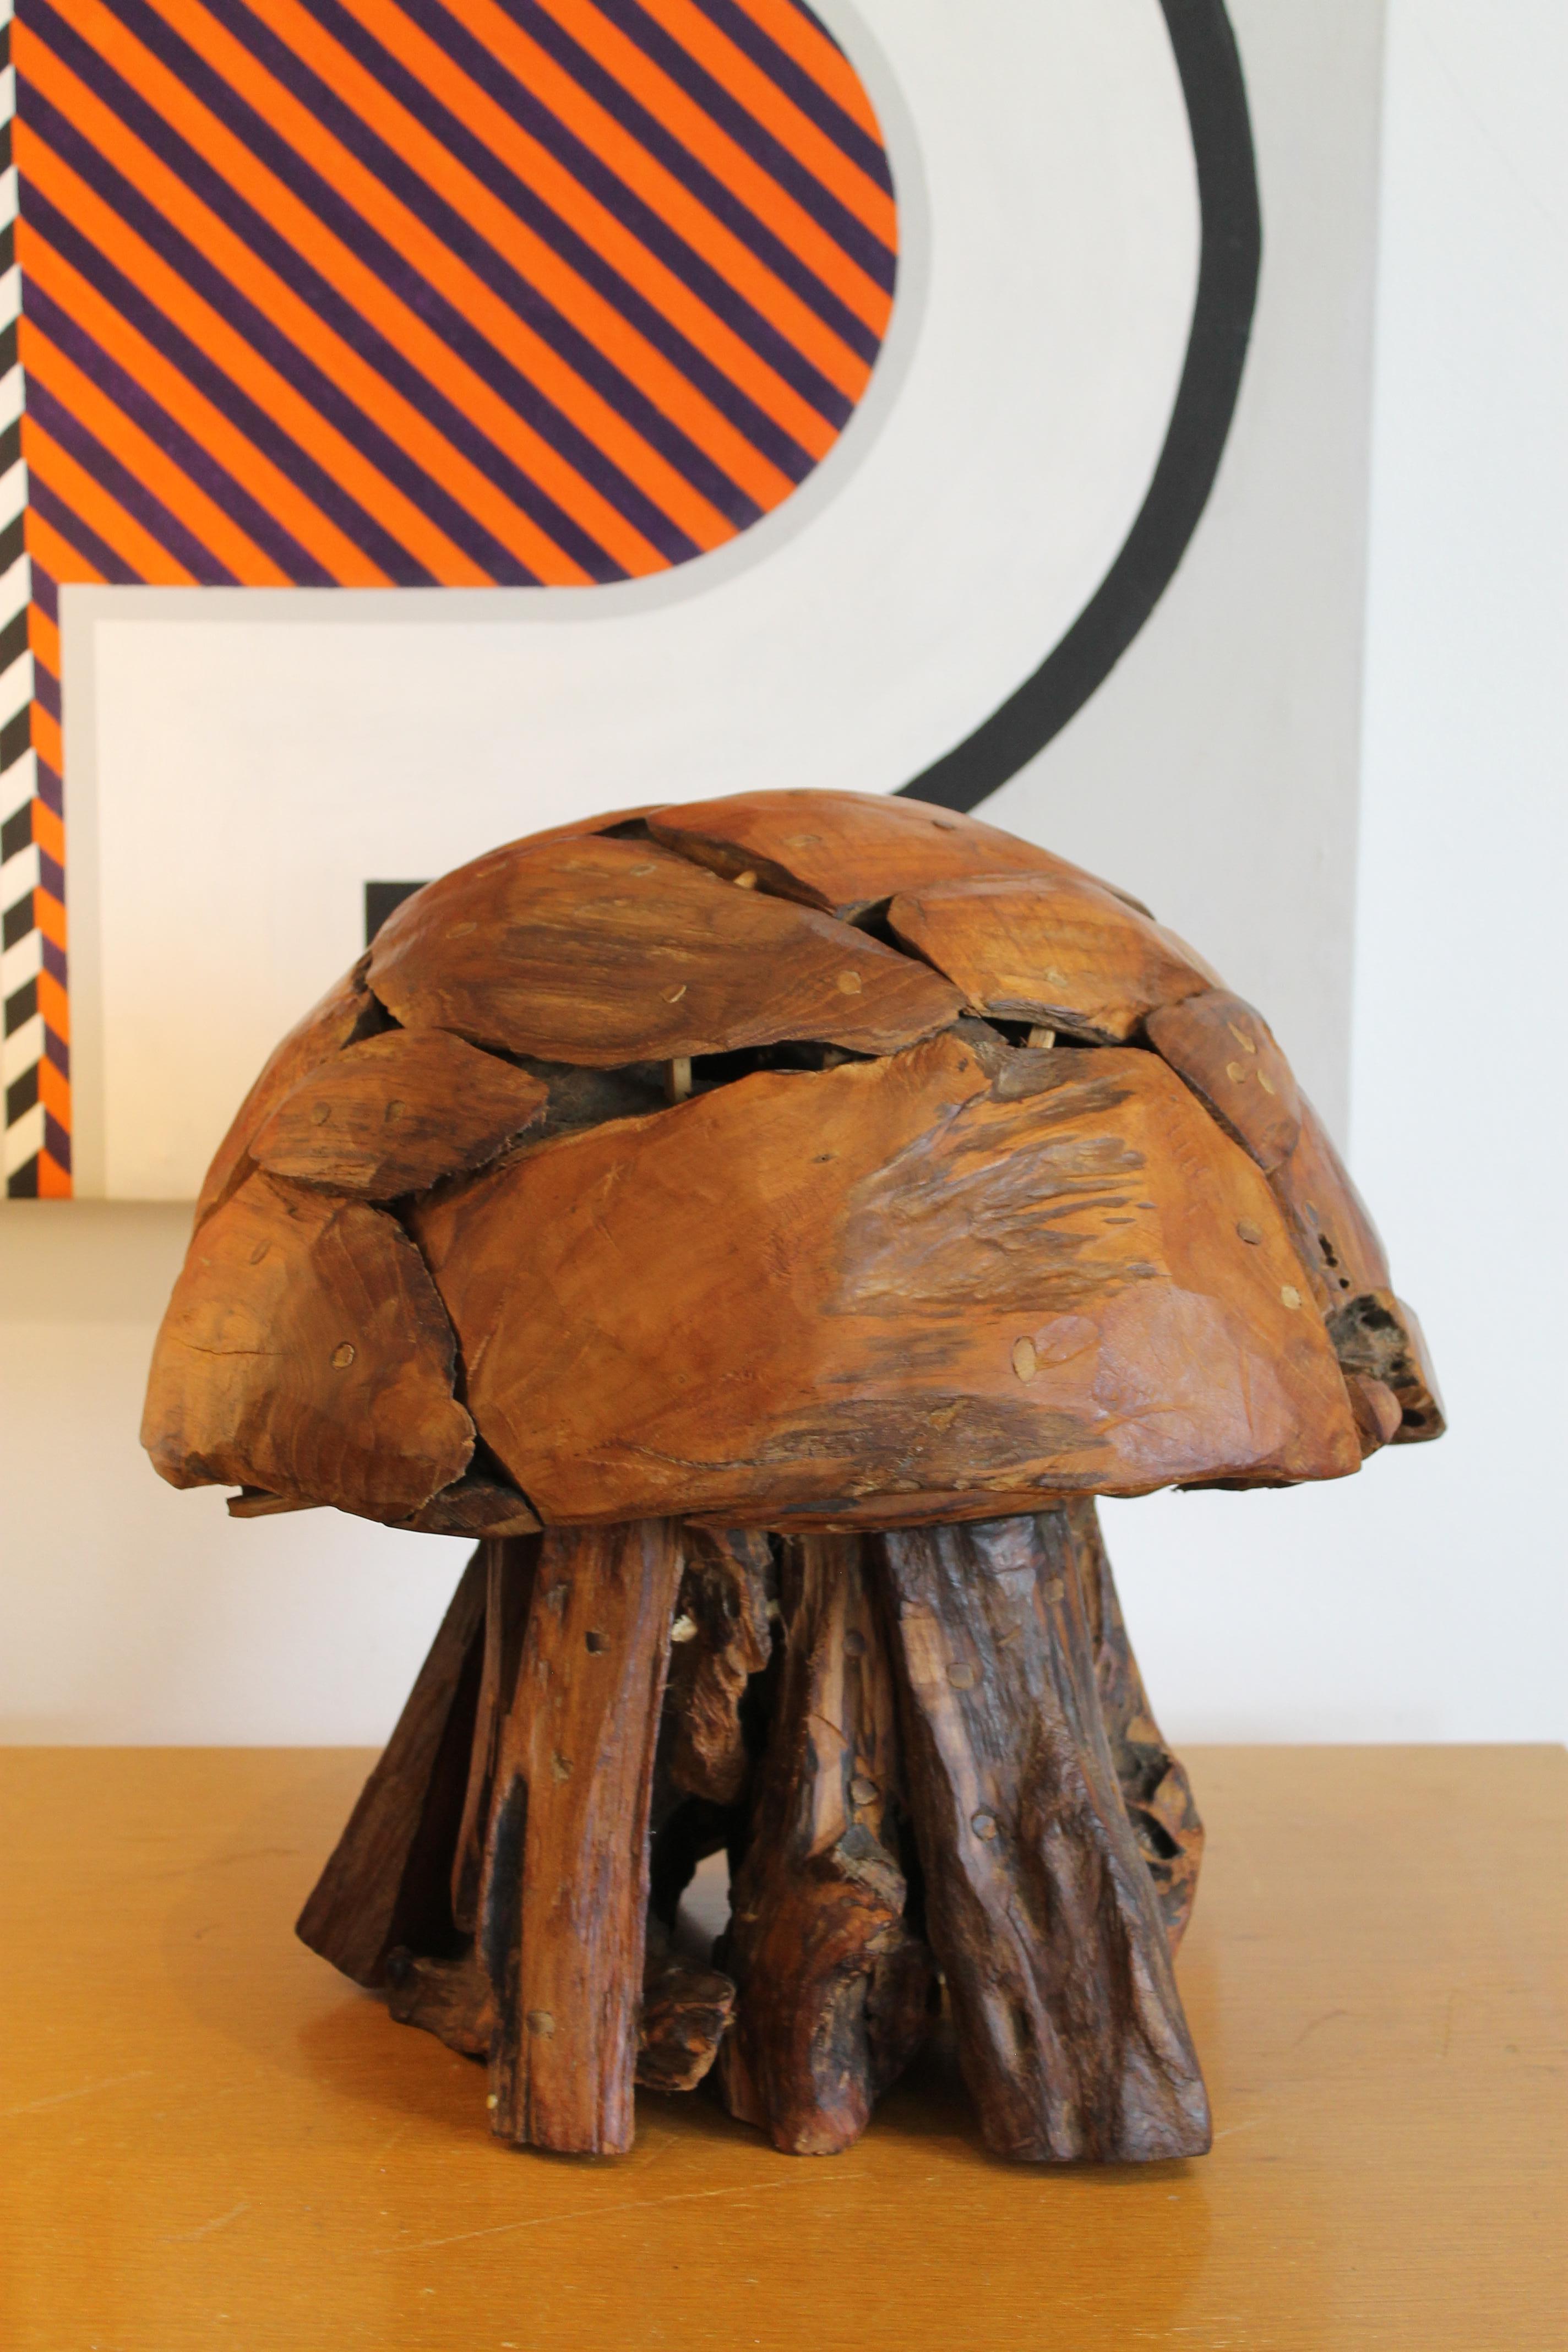 An impressive wood sculpture in the form of a mushroom. Wood fragments are assembled and all secured with wooden dowels. No nails or screws were used. Solid heavy piece. Measures 16.5